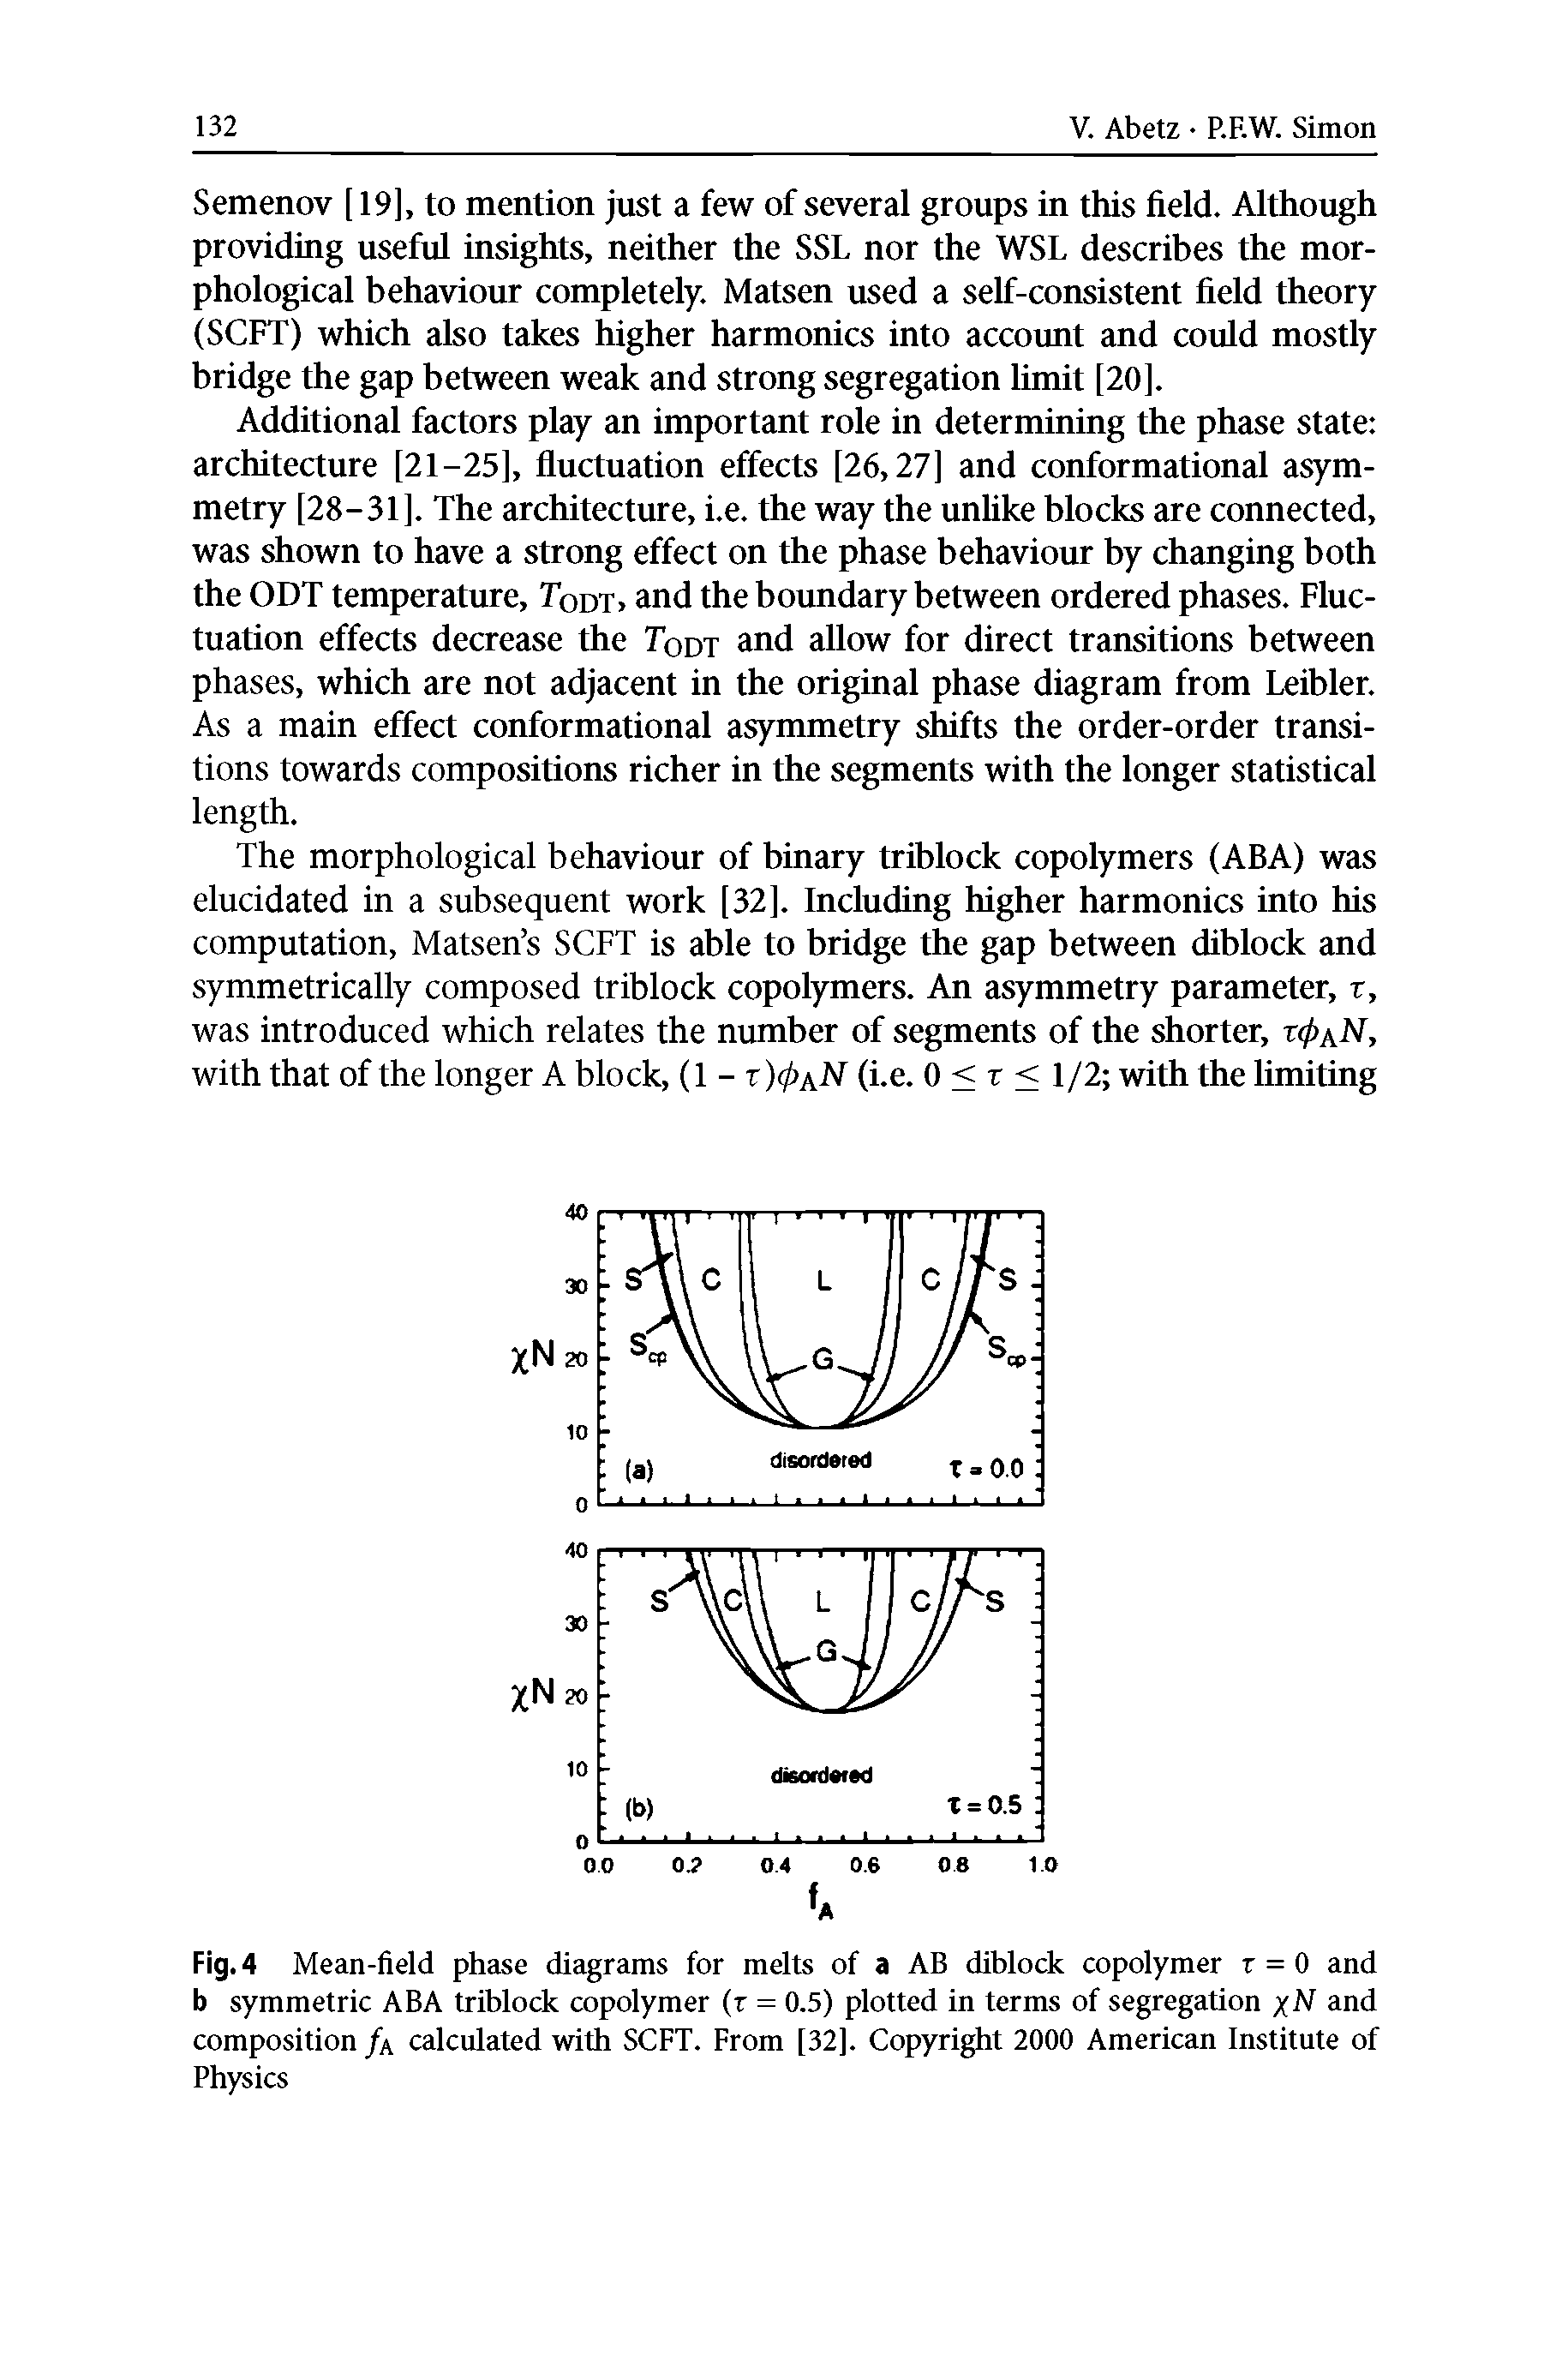 Fig. 4 Mean-field phase diagrams for melts of a AB diblock copolymer r = 0 and b symmetric ABA triblock copolymer (r = 0.5) plotted in terms of segregation /N and composition /a calculated with SCFT. From [32]. Copyright 2000 American Institute of Physics...